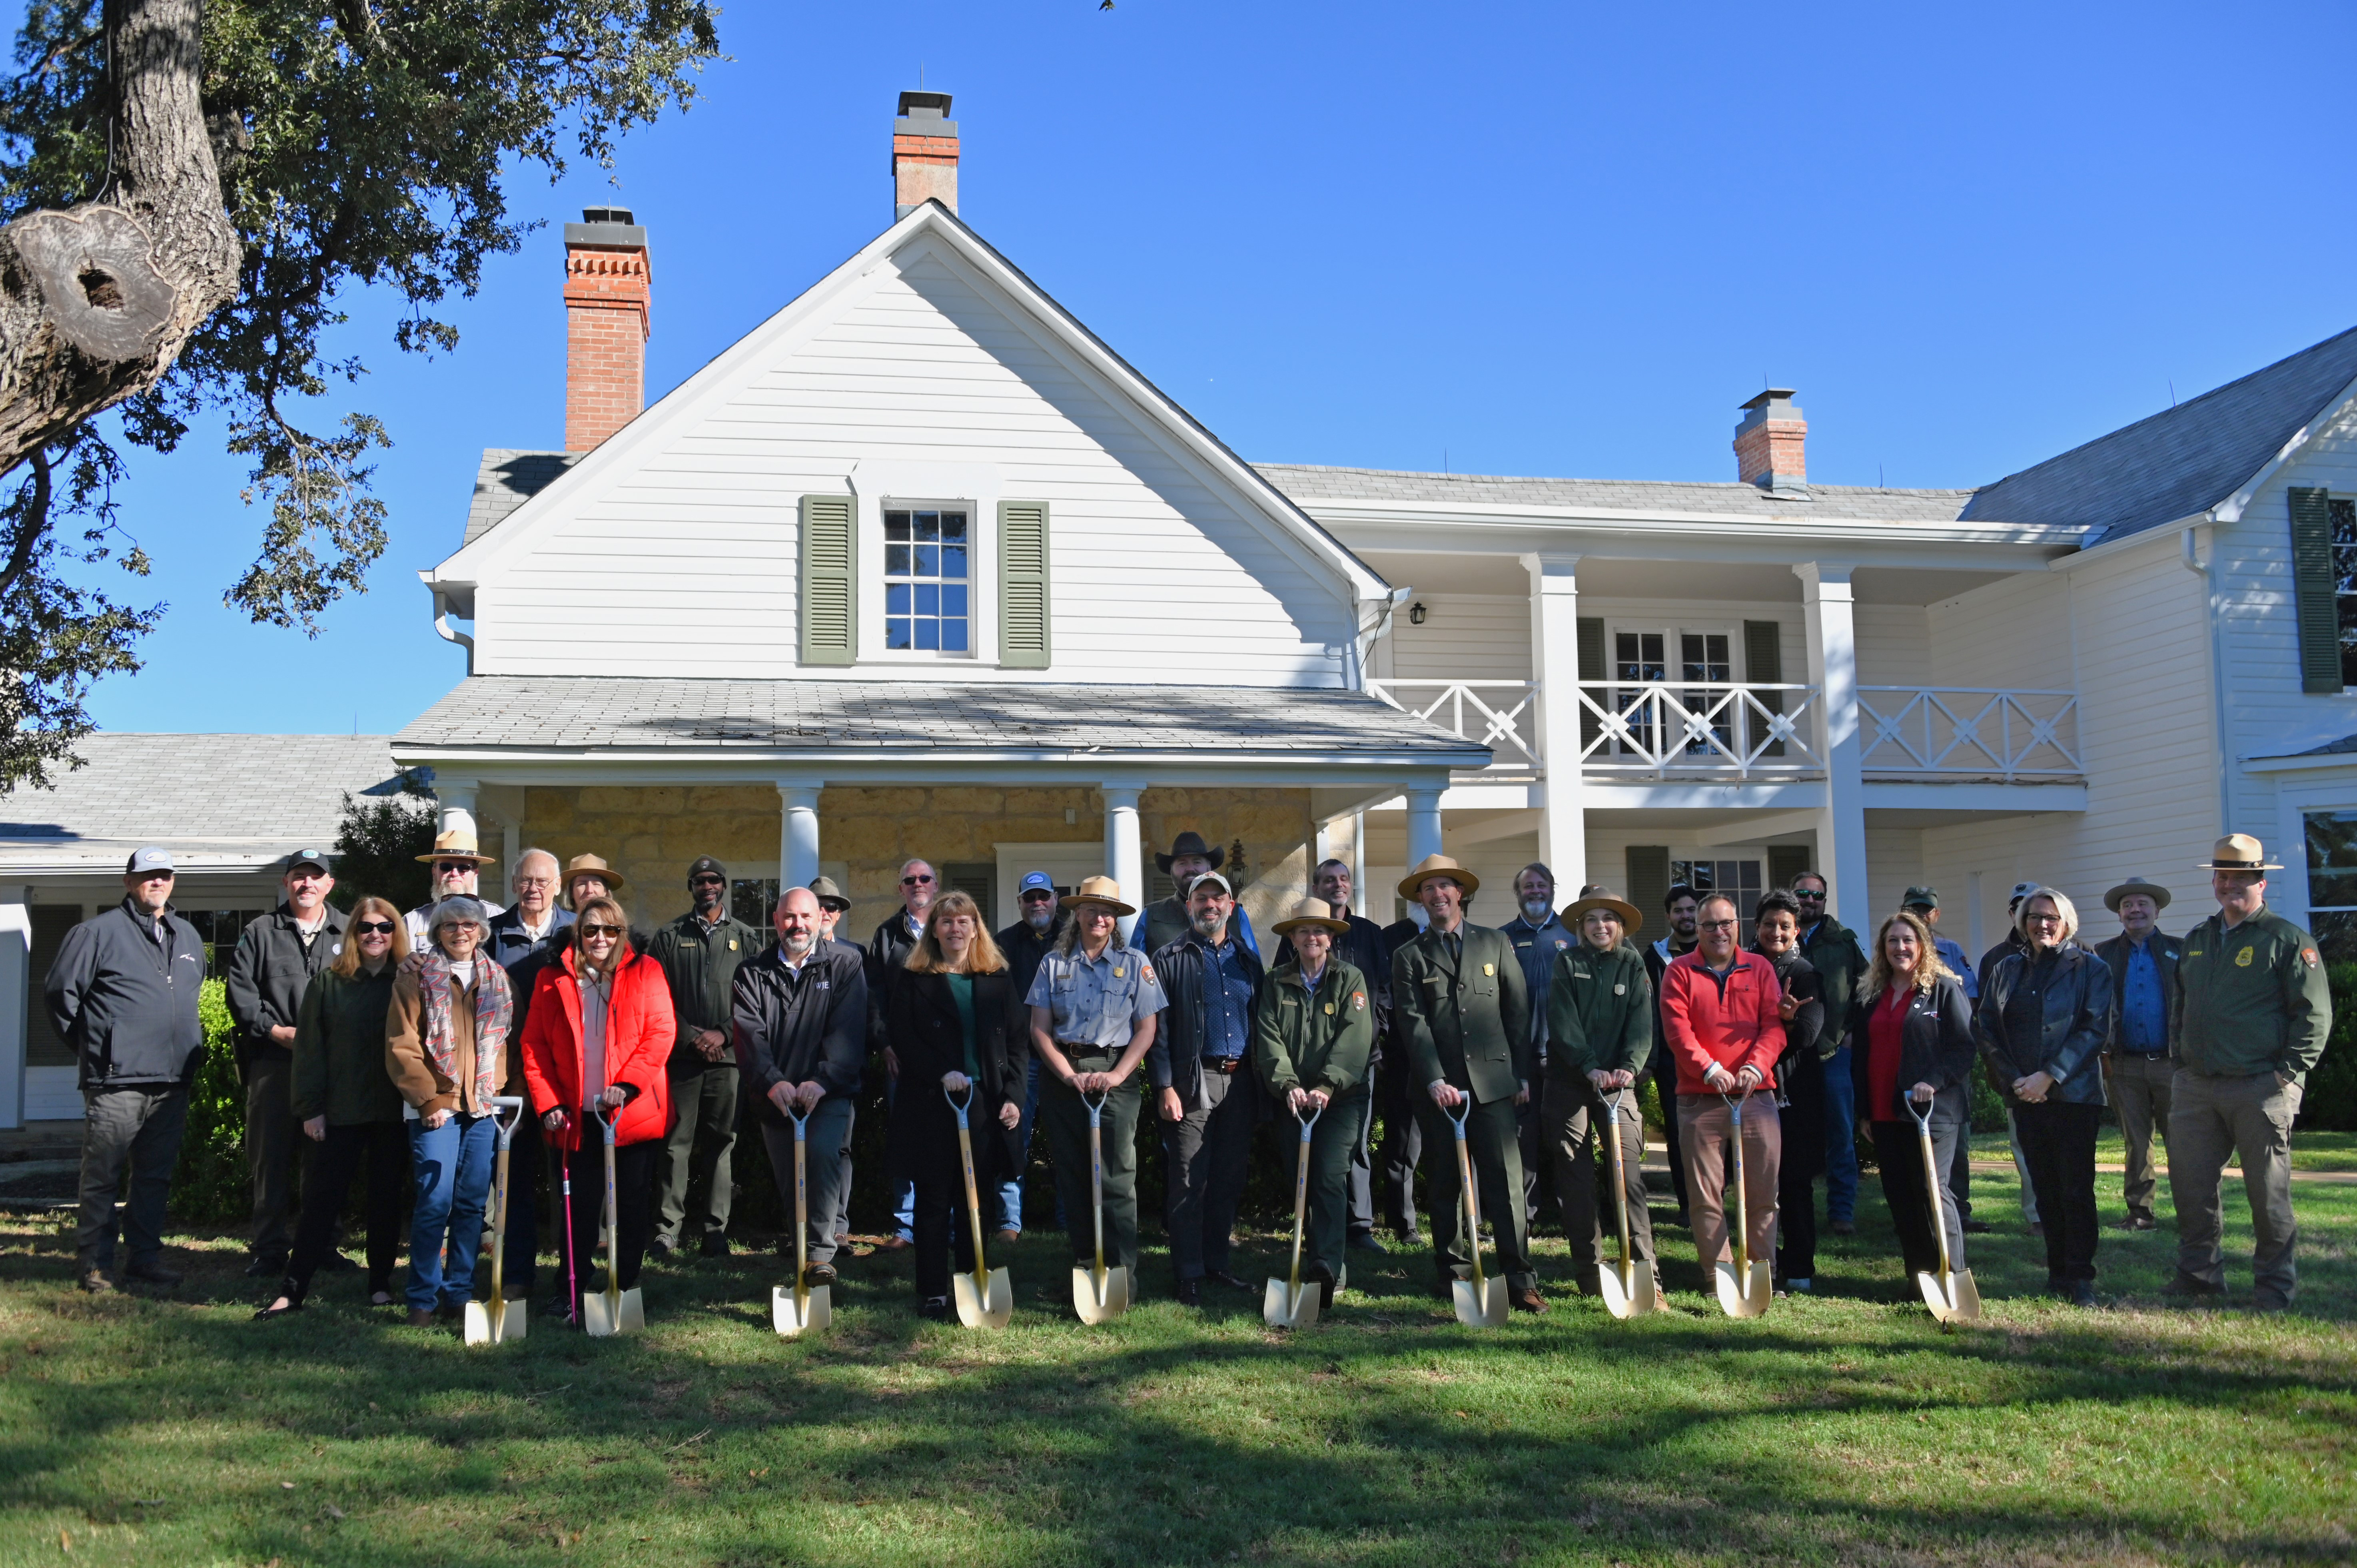 A large group of people, some holding gold shovels, stand in front of a big, two-story, white frame house.